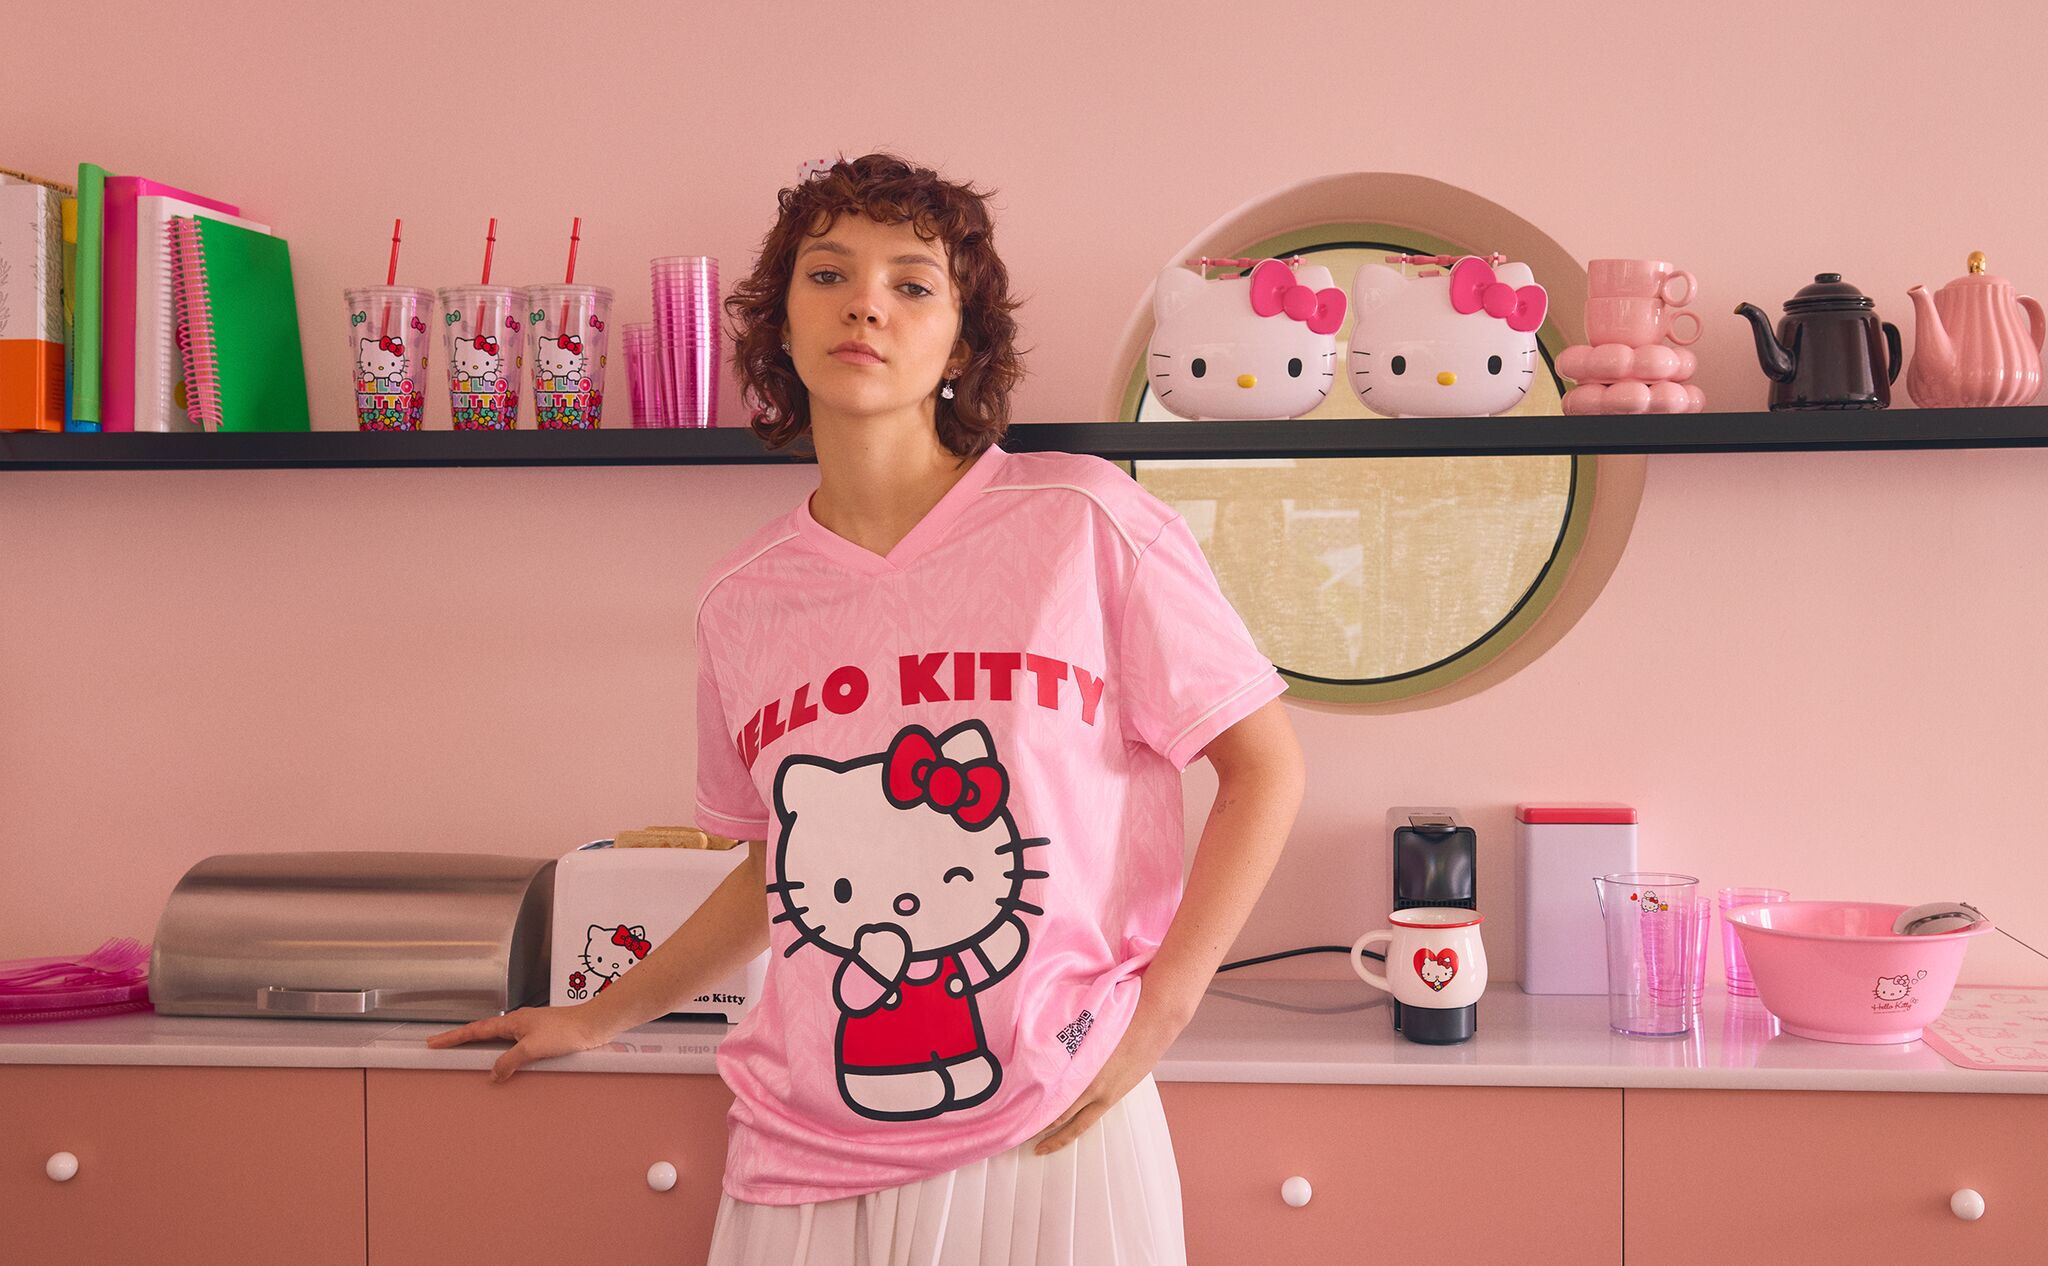 Buy Hello Kitty Womens T-Shirt Bra in Black/Pink Online at